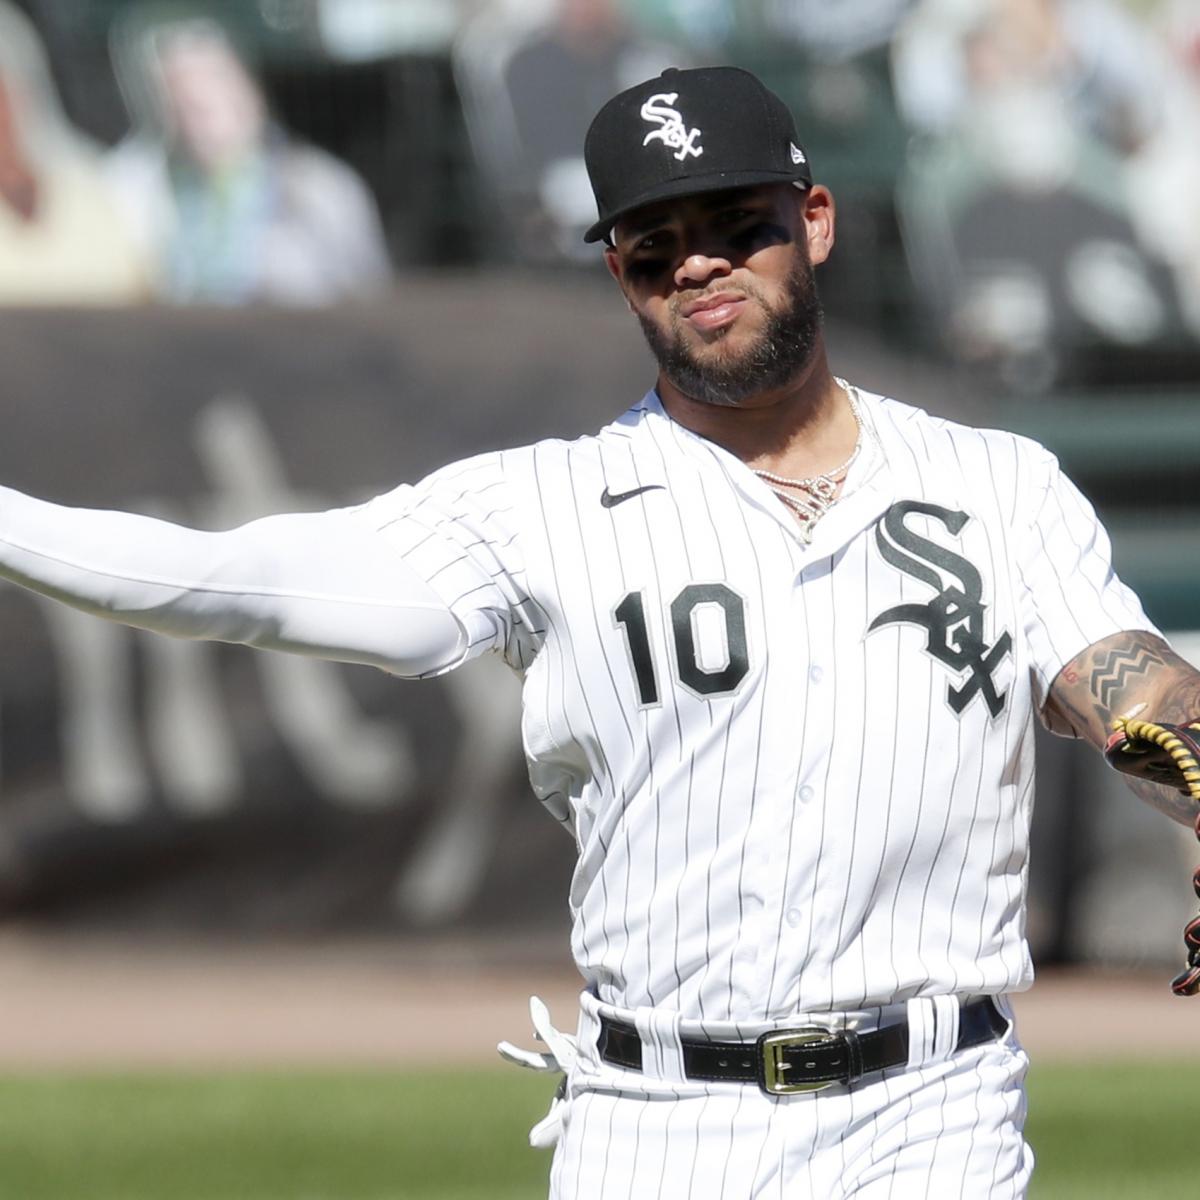 Yoan Moncada's Offseason Workouts Seem To Be Going Well